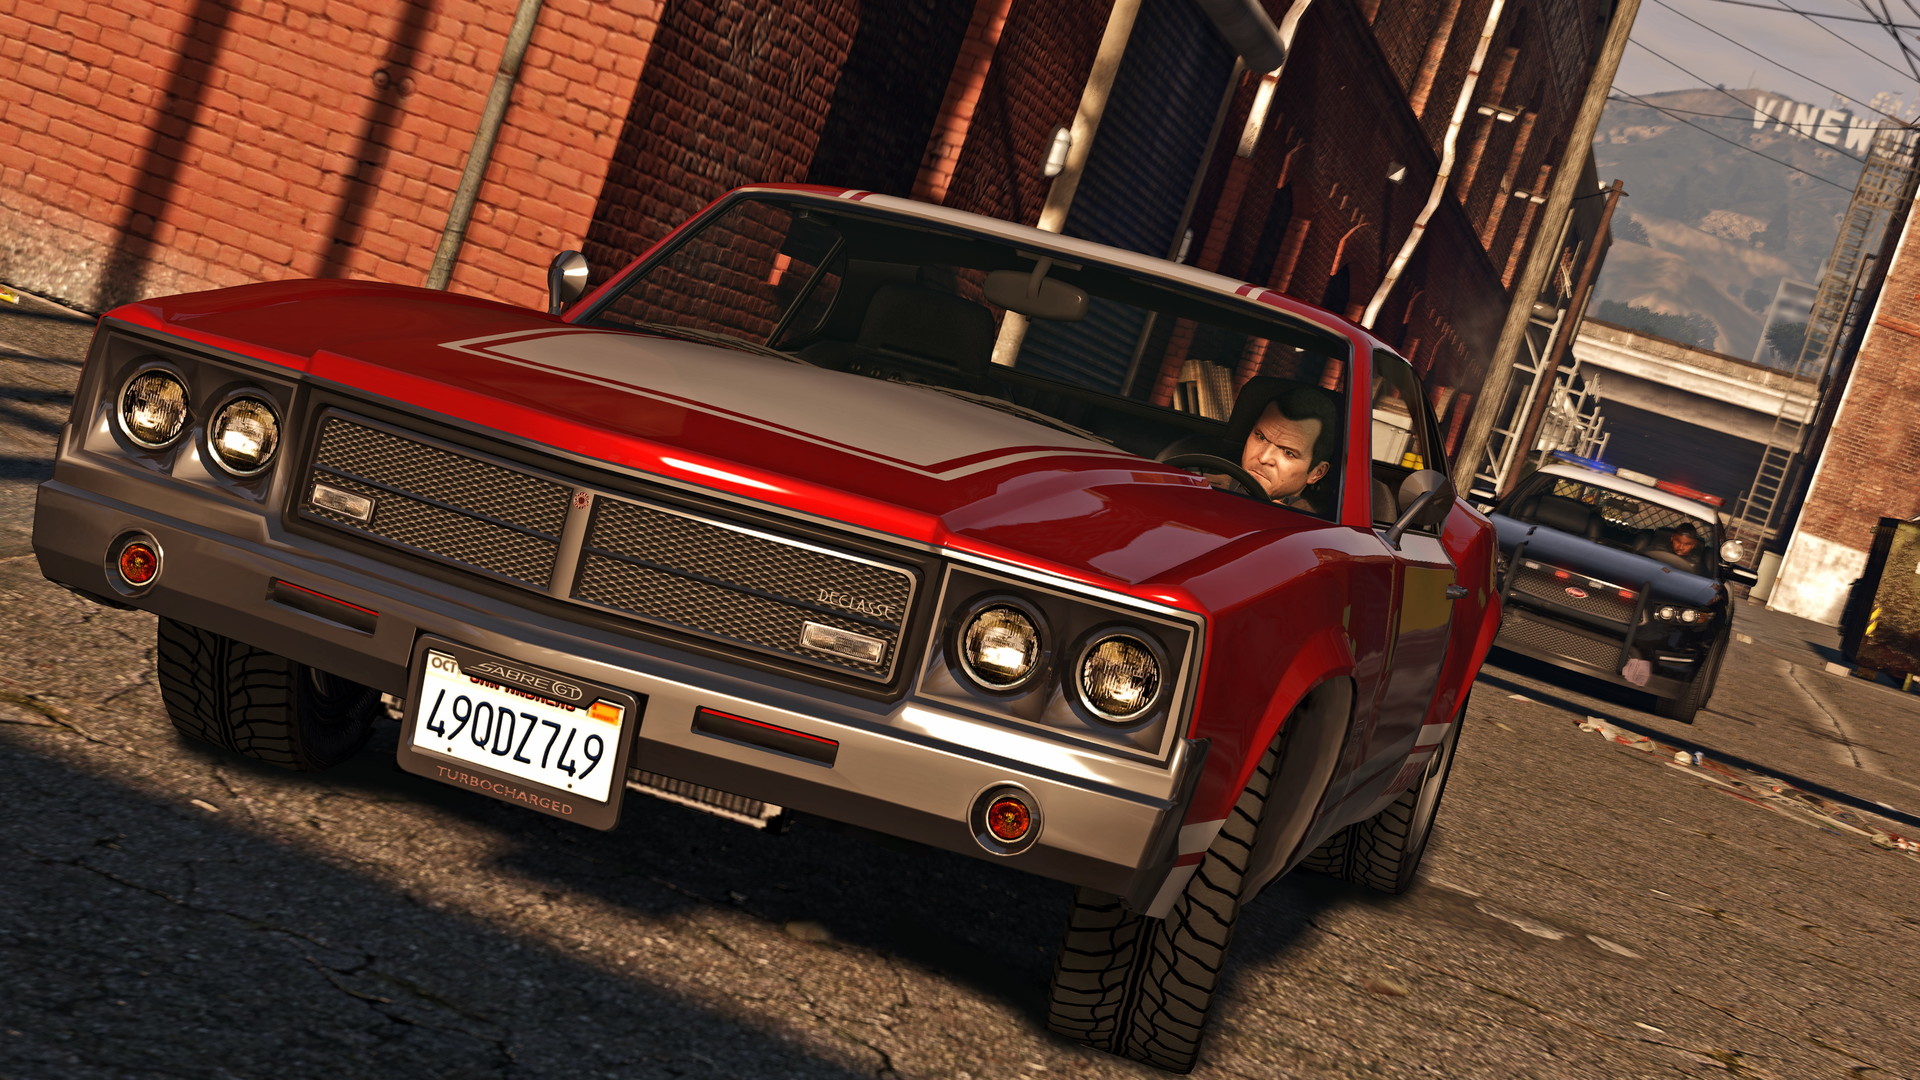 Michael drives a red muscle car from GTA 5